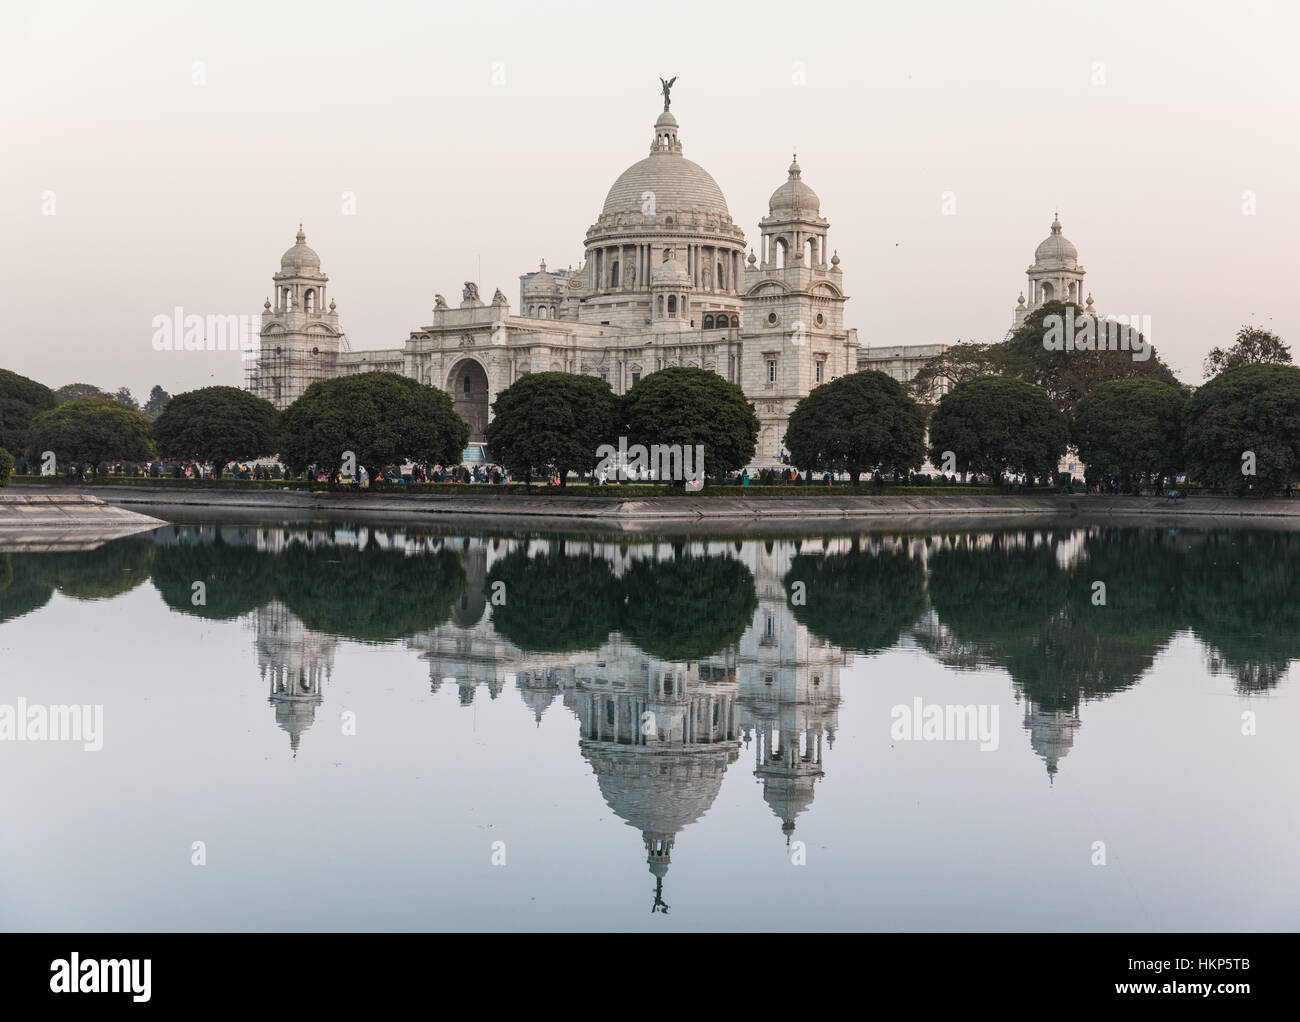 The Victoria Memorial and reflection in Kolkata (Calcutta), West Bengal, India Stock Photo